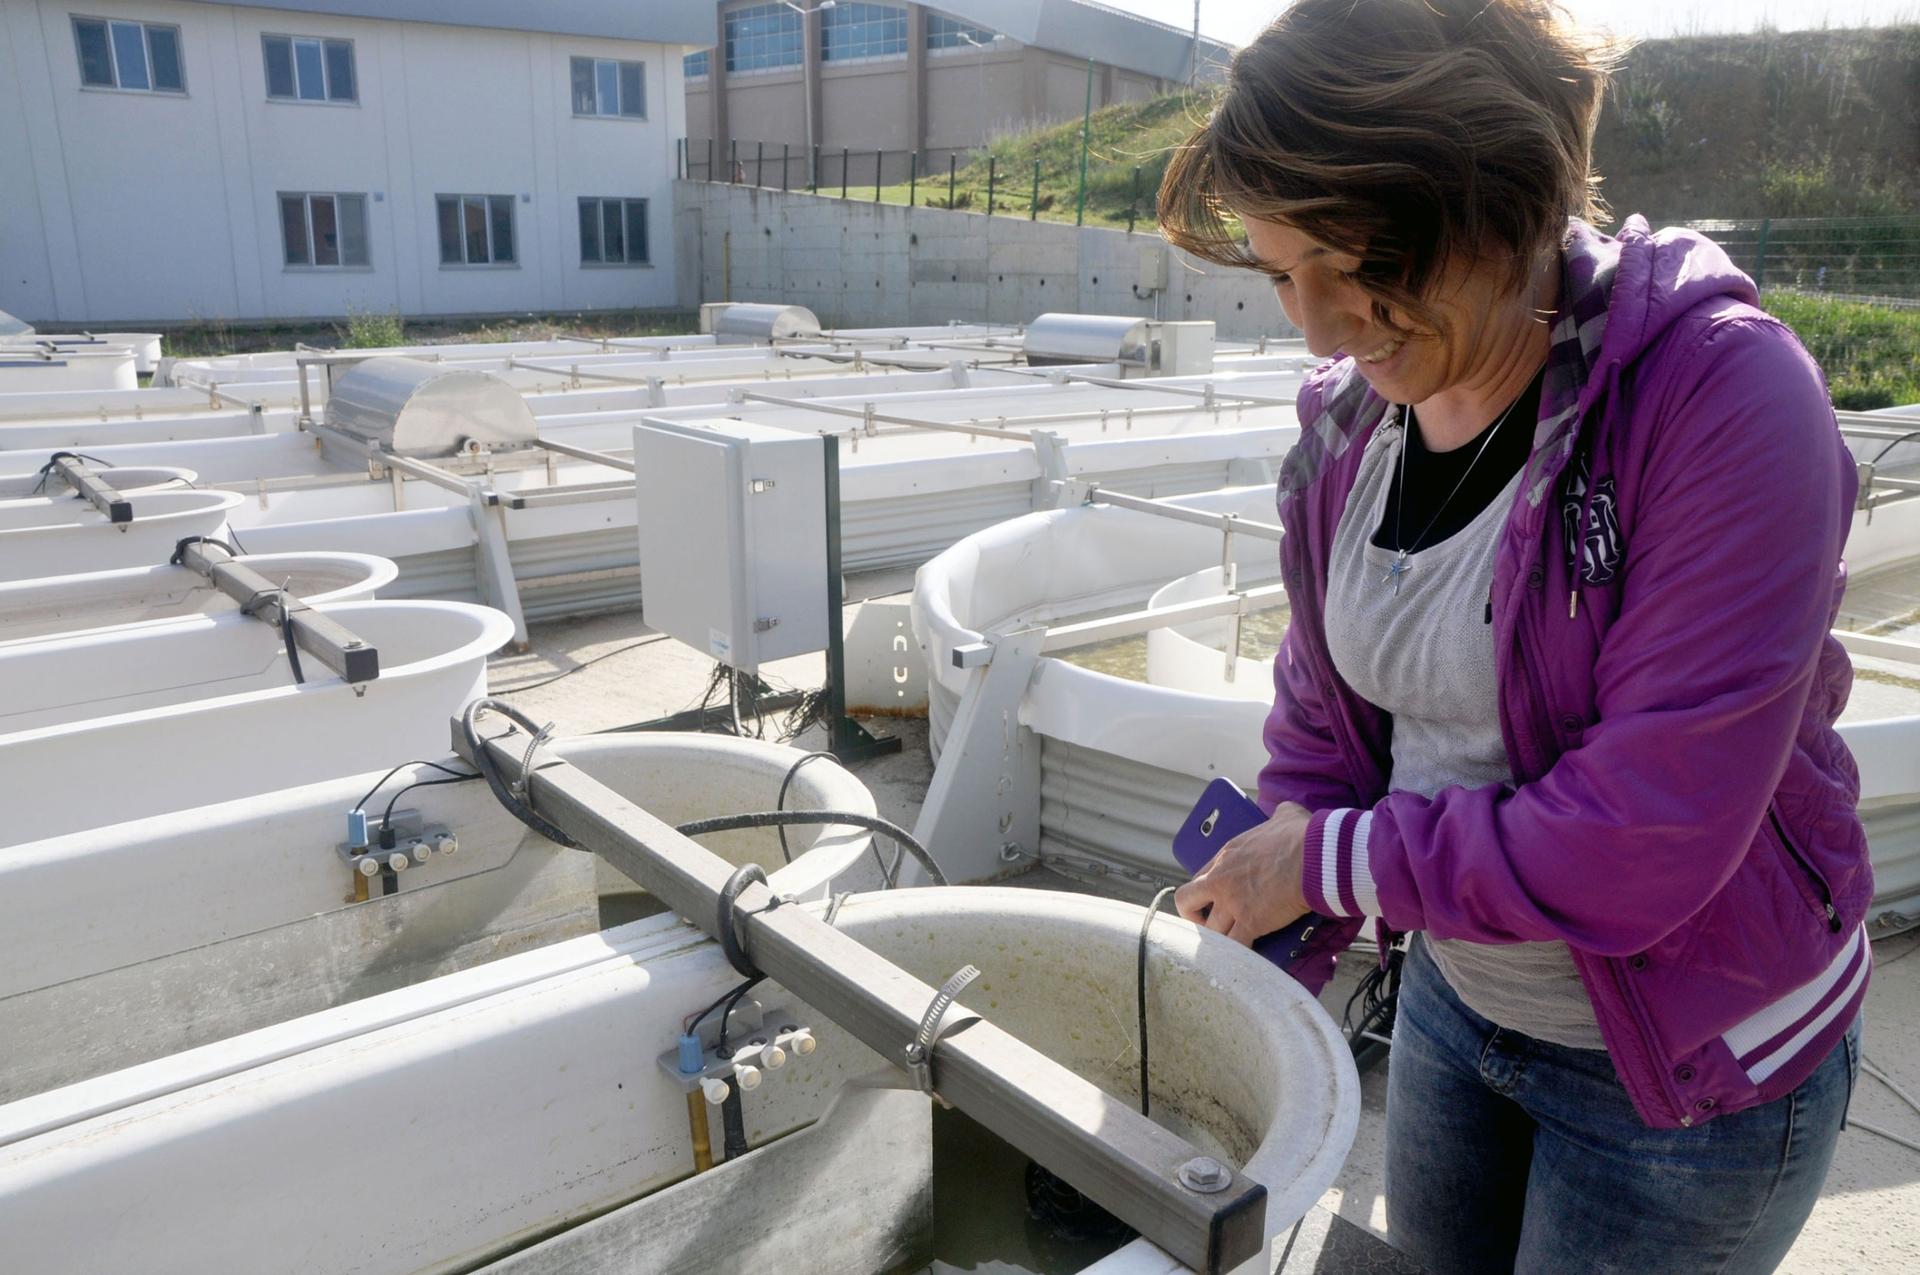 Irem Karamollaoğlu, project expert for the lab, checks a motor in an algae seeding pool at the Istanbul Microalgae Biotechnologies Research and Development Center. After growing in small pools, the algae is transferred to the larger racetrack ponds for a 